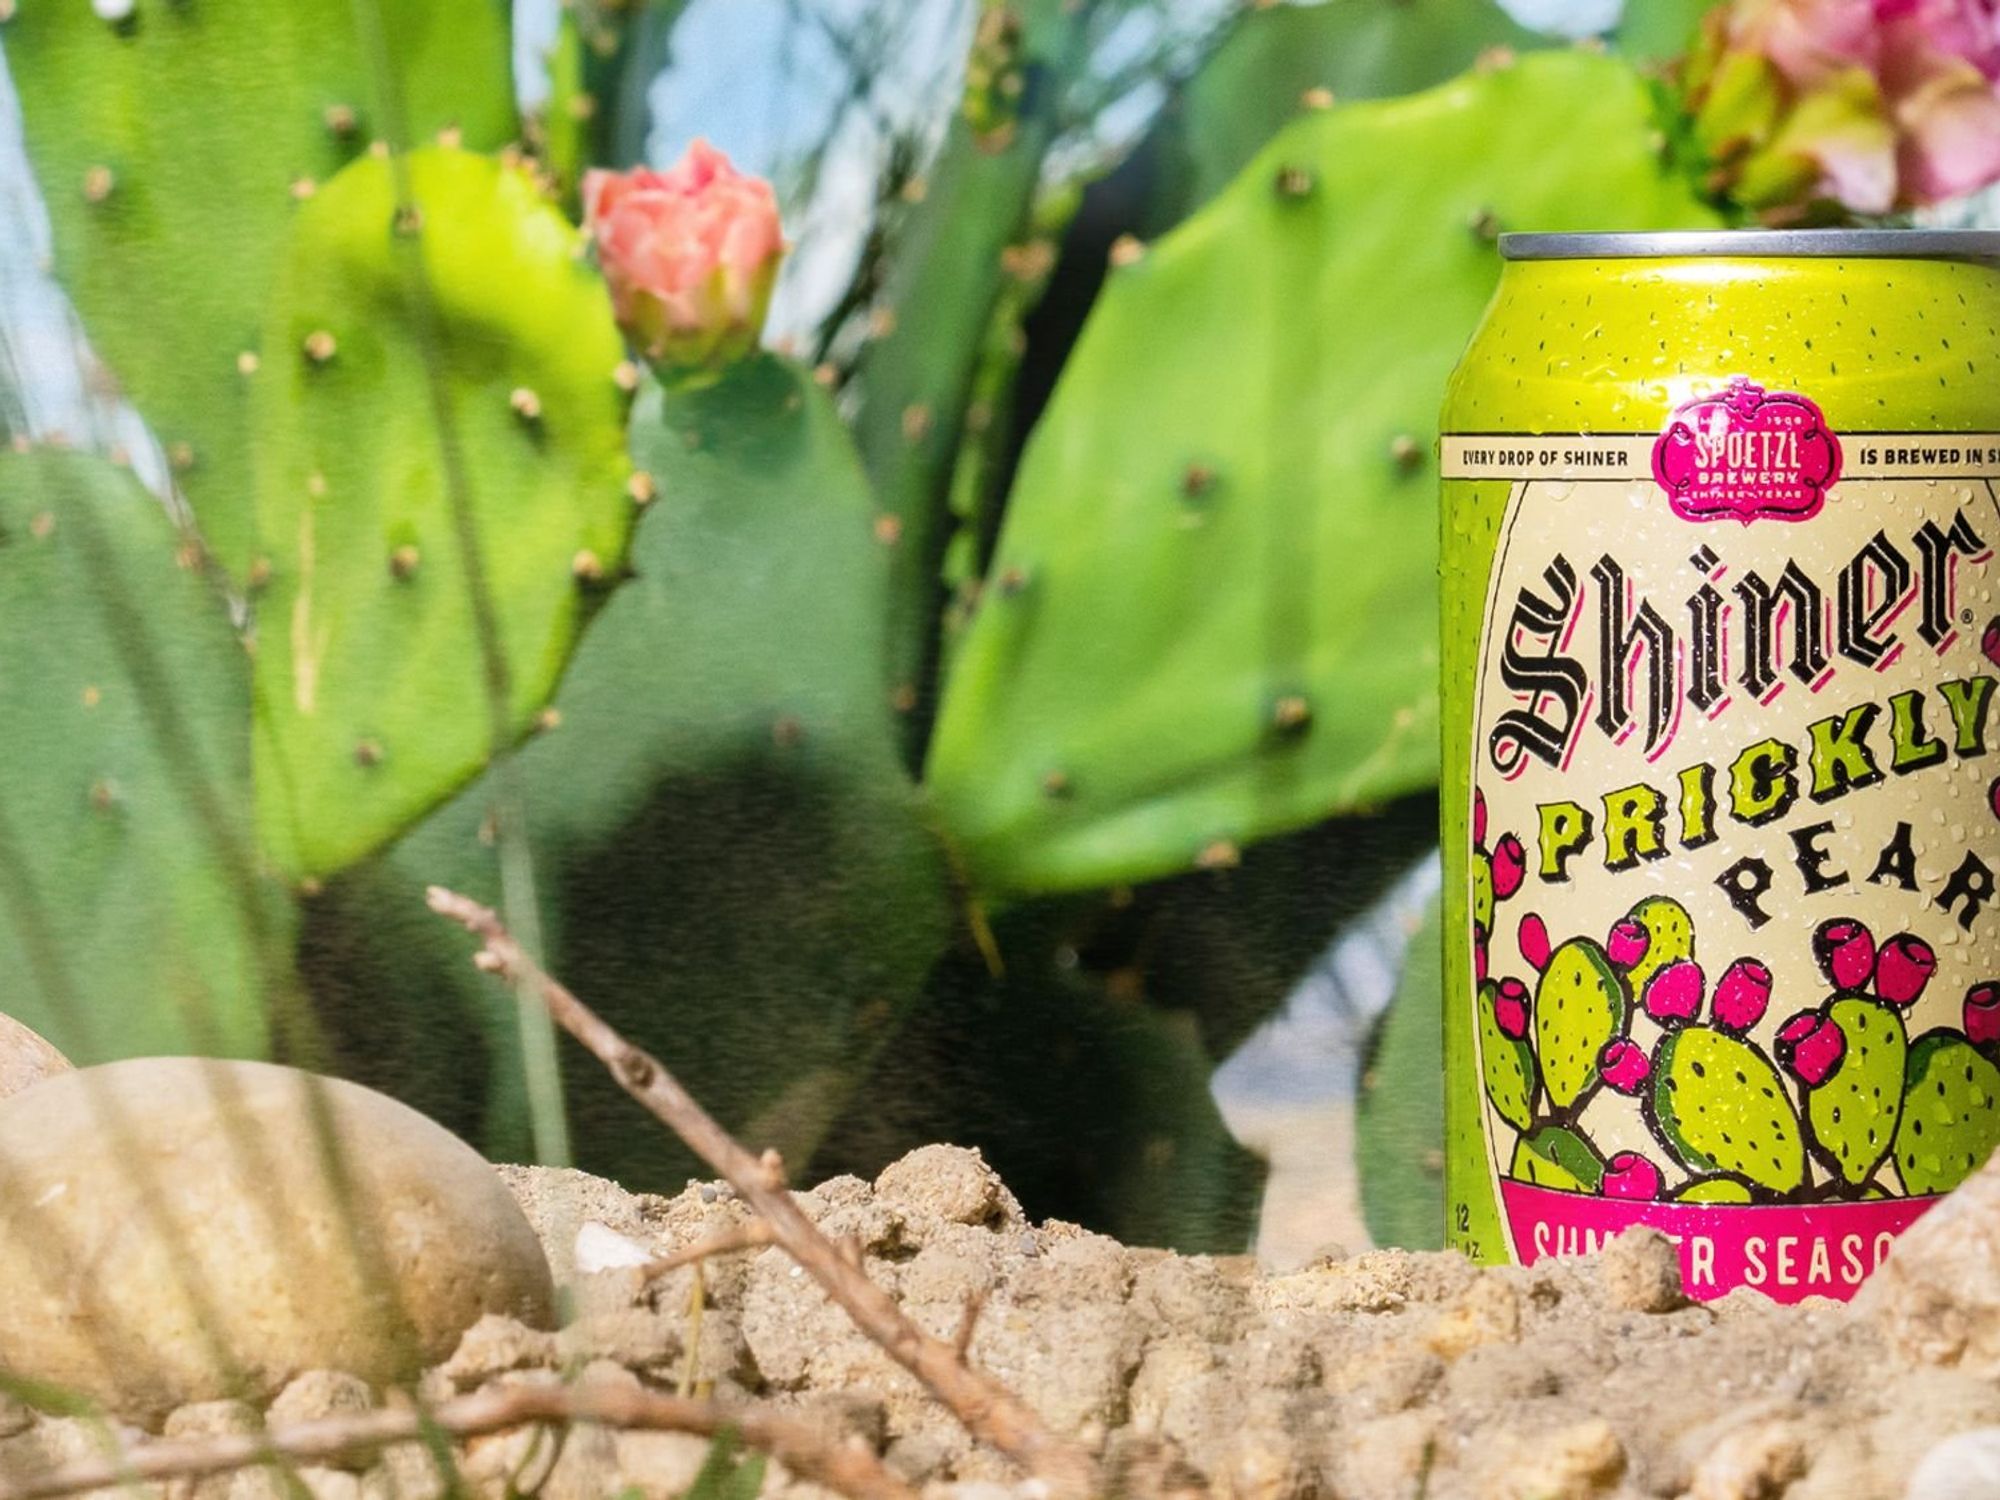 Shiner Prickly Pear Lager